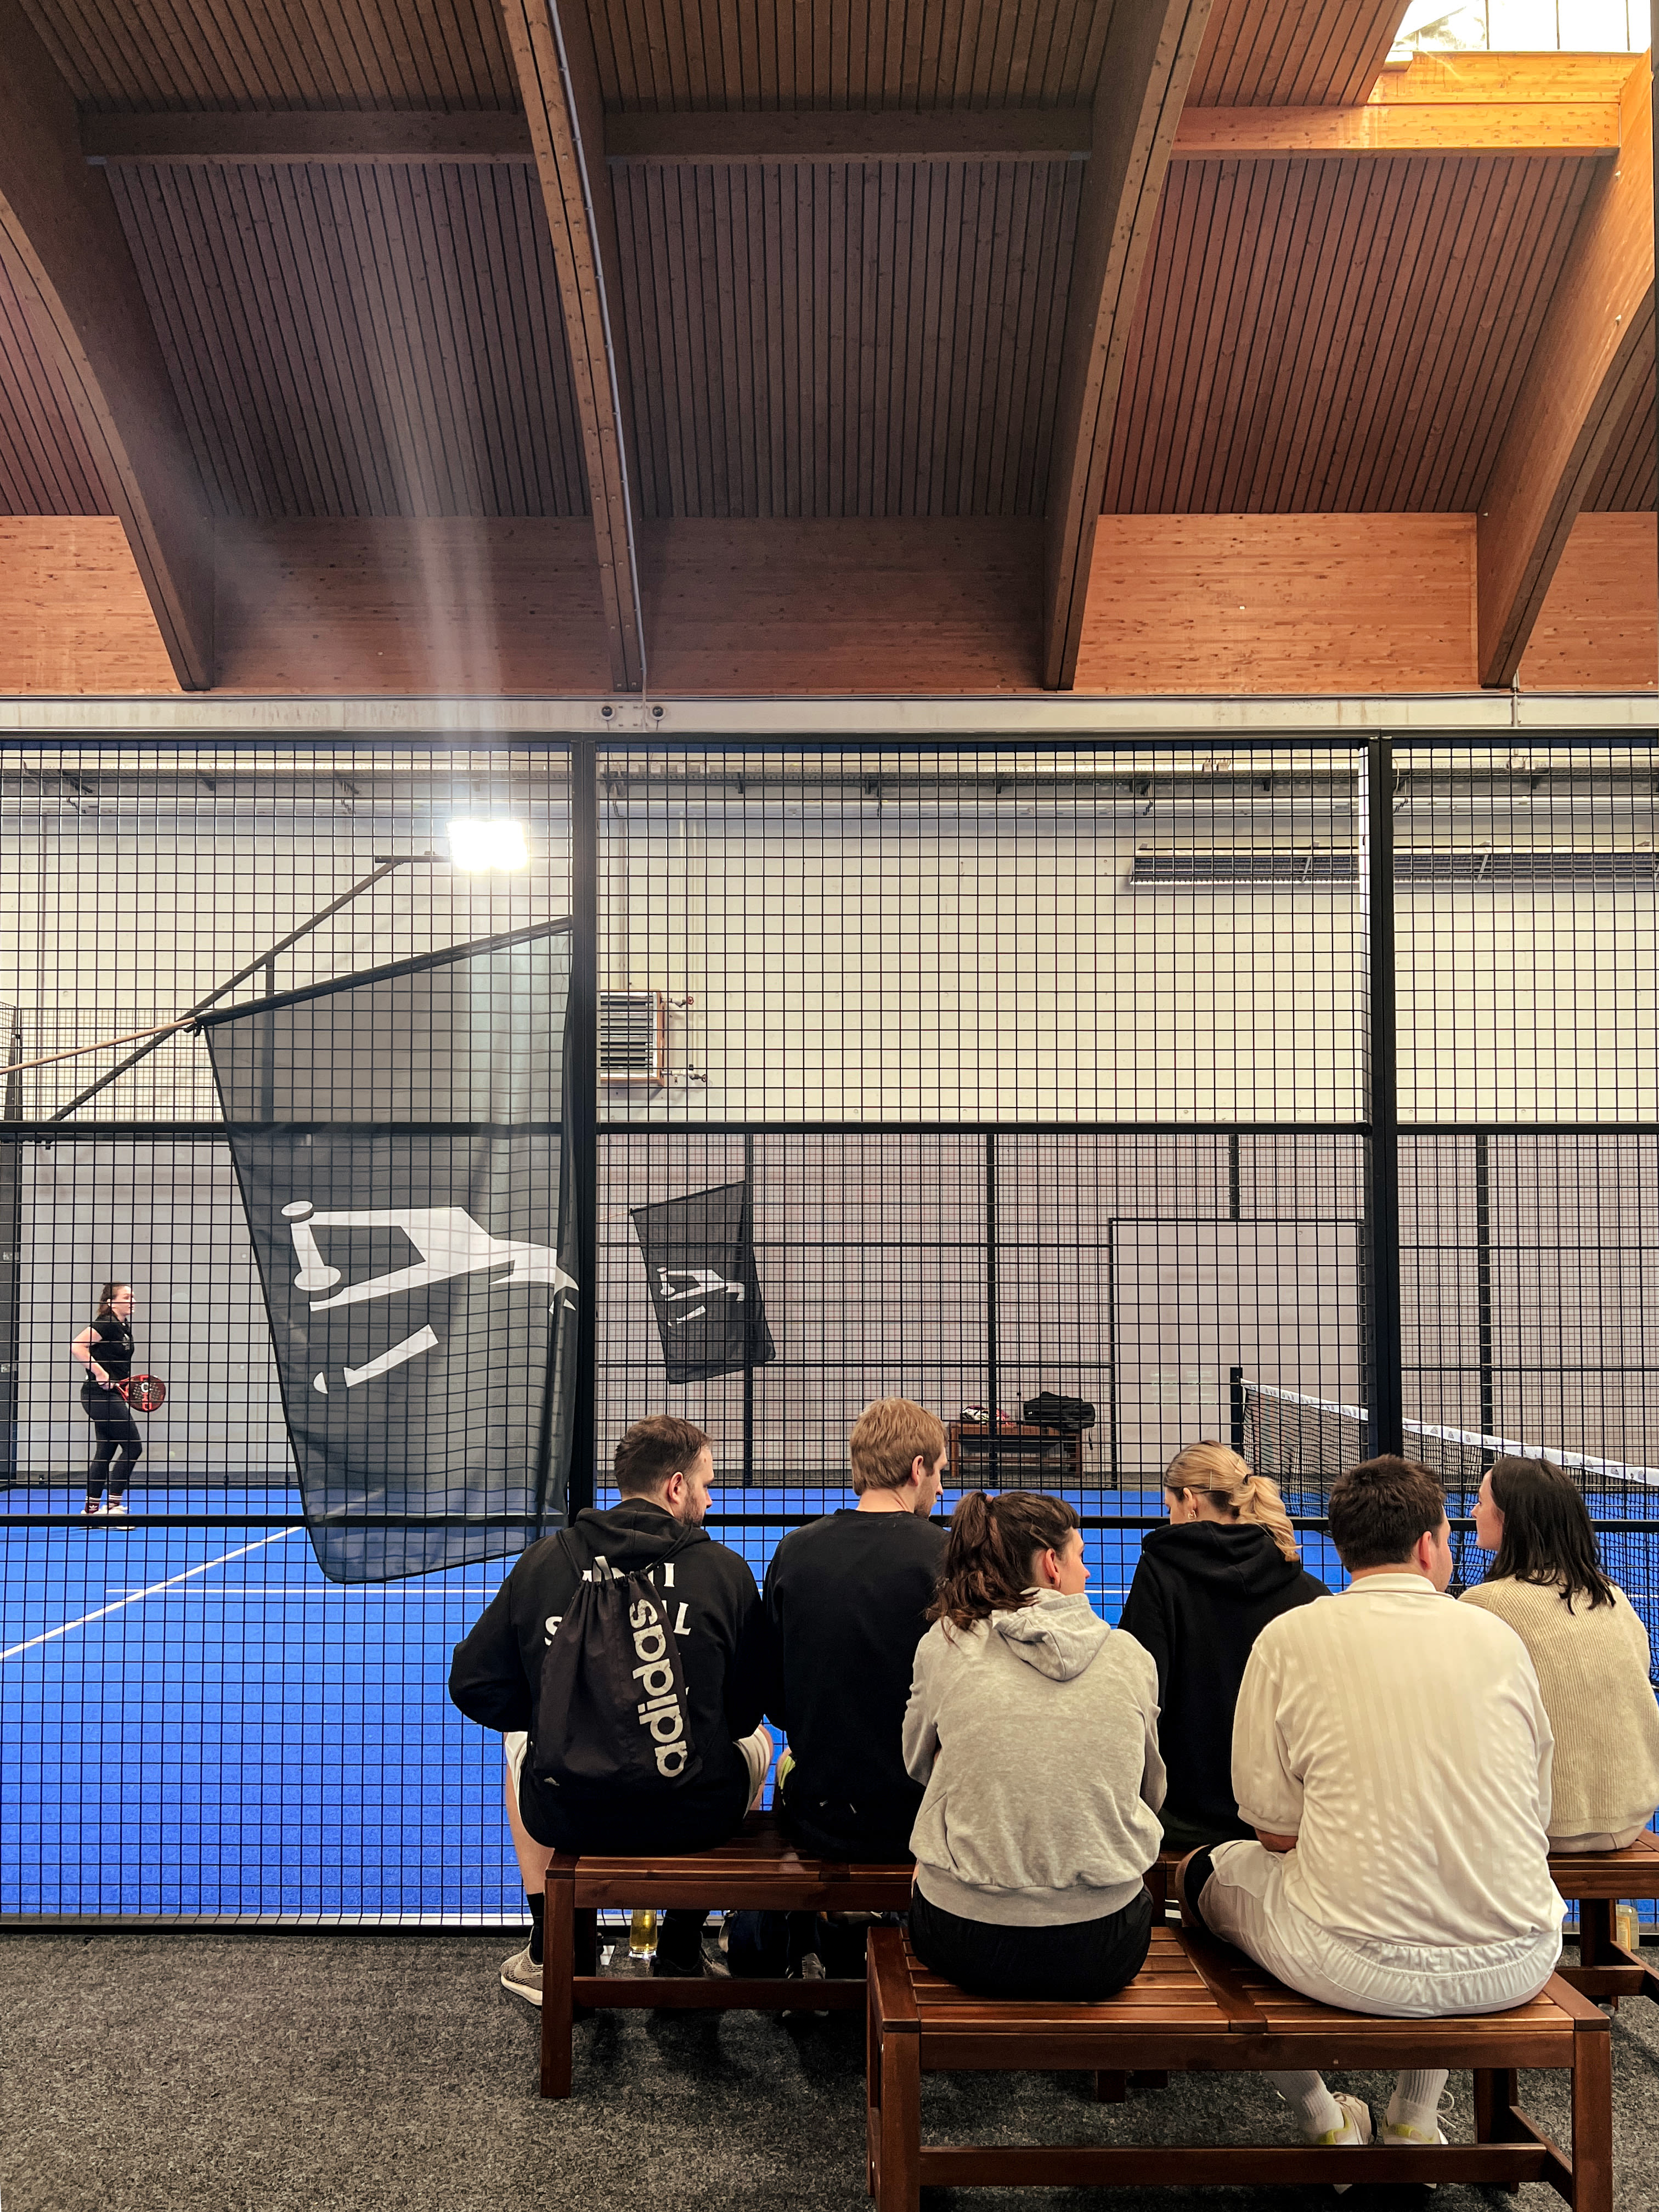 Image of a group of Jung von Matt DONAU employees sitting in front of a cage court of the trend sport Padel watching others.